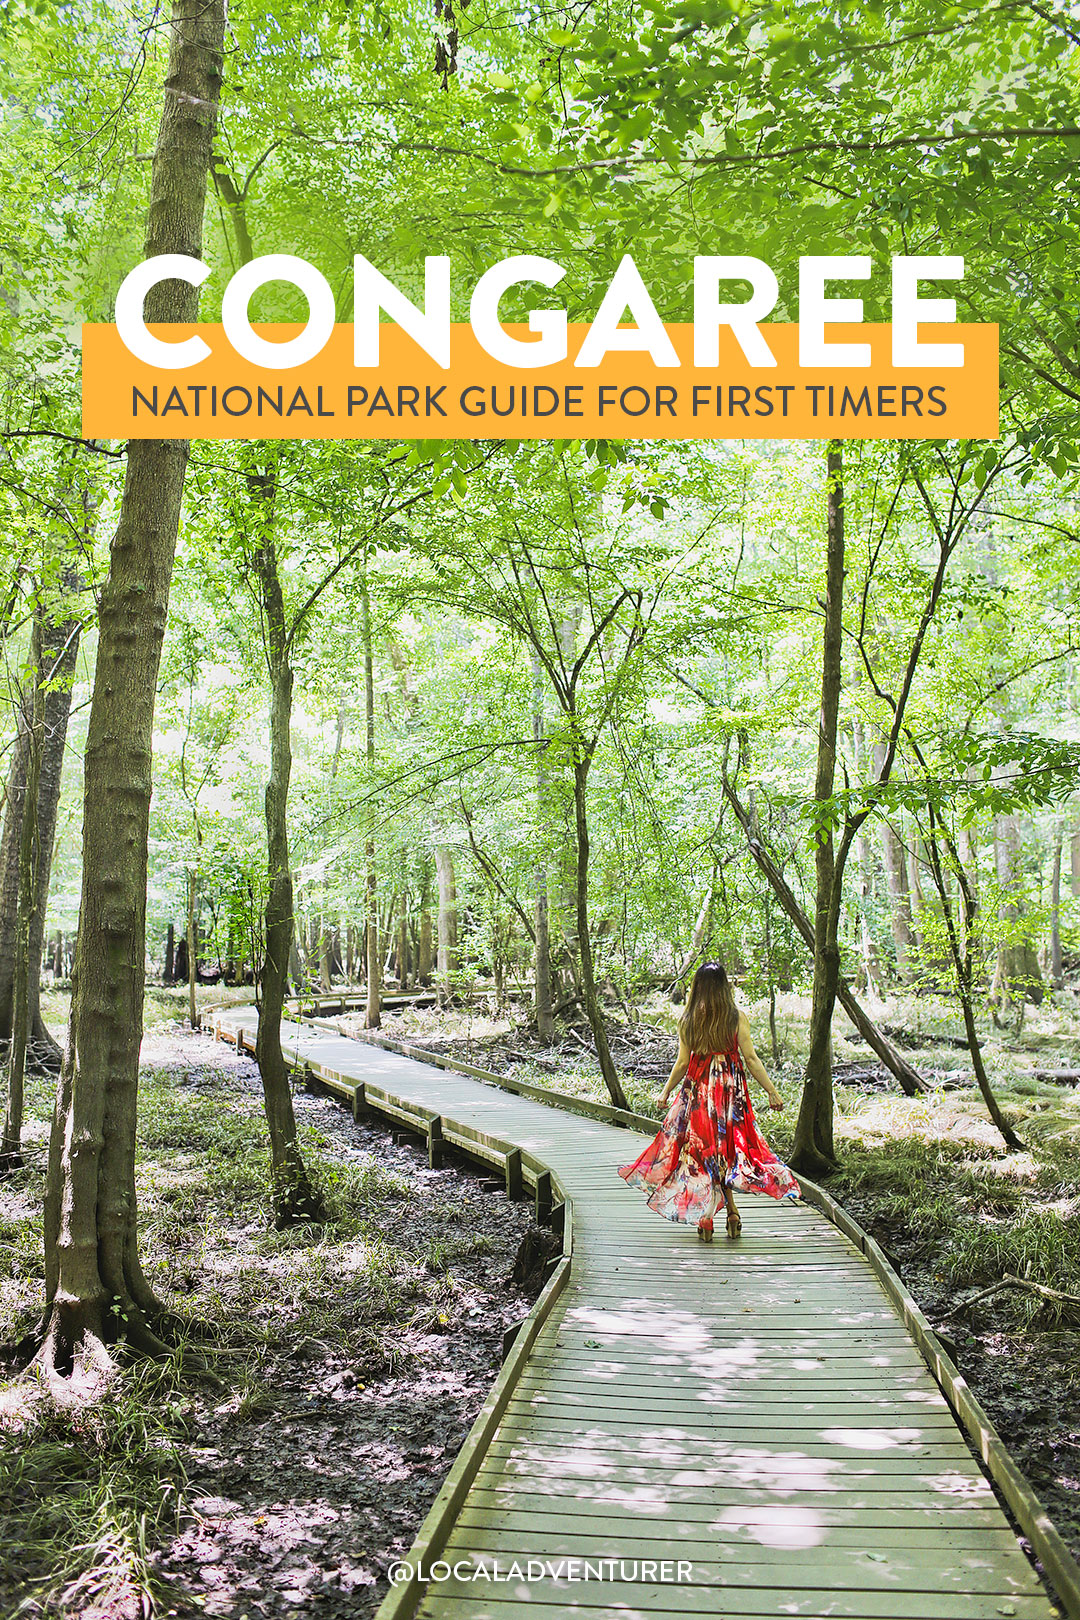 Congaree National Park Guide